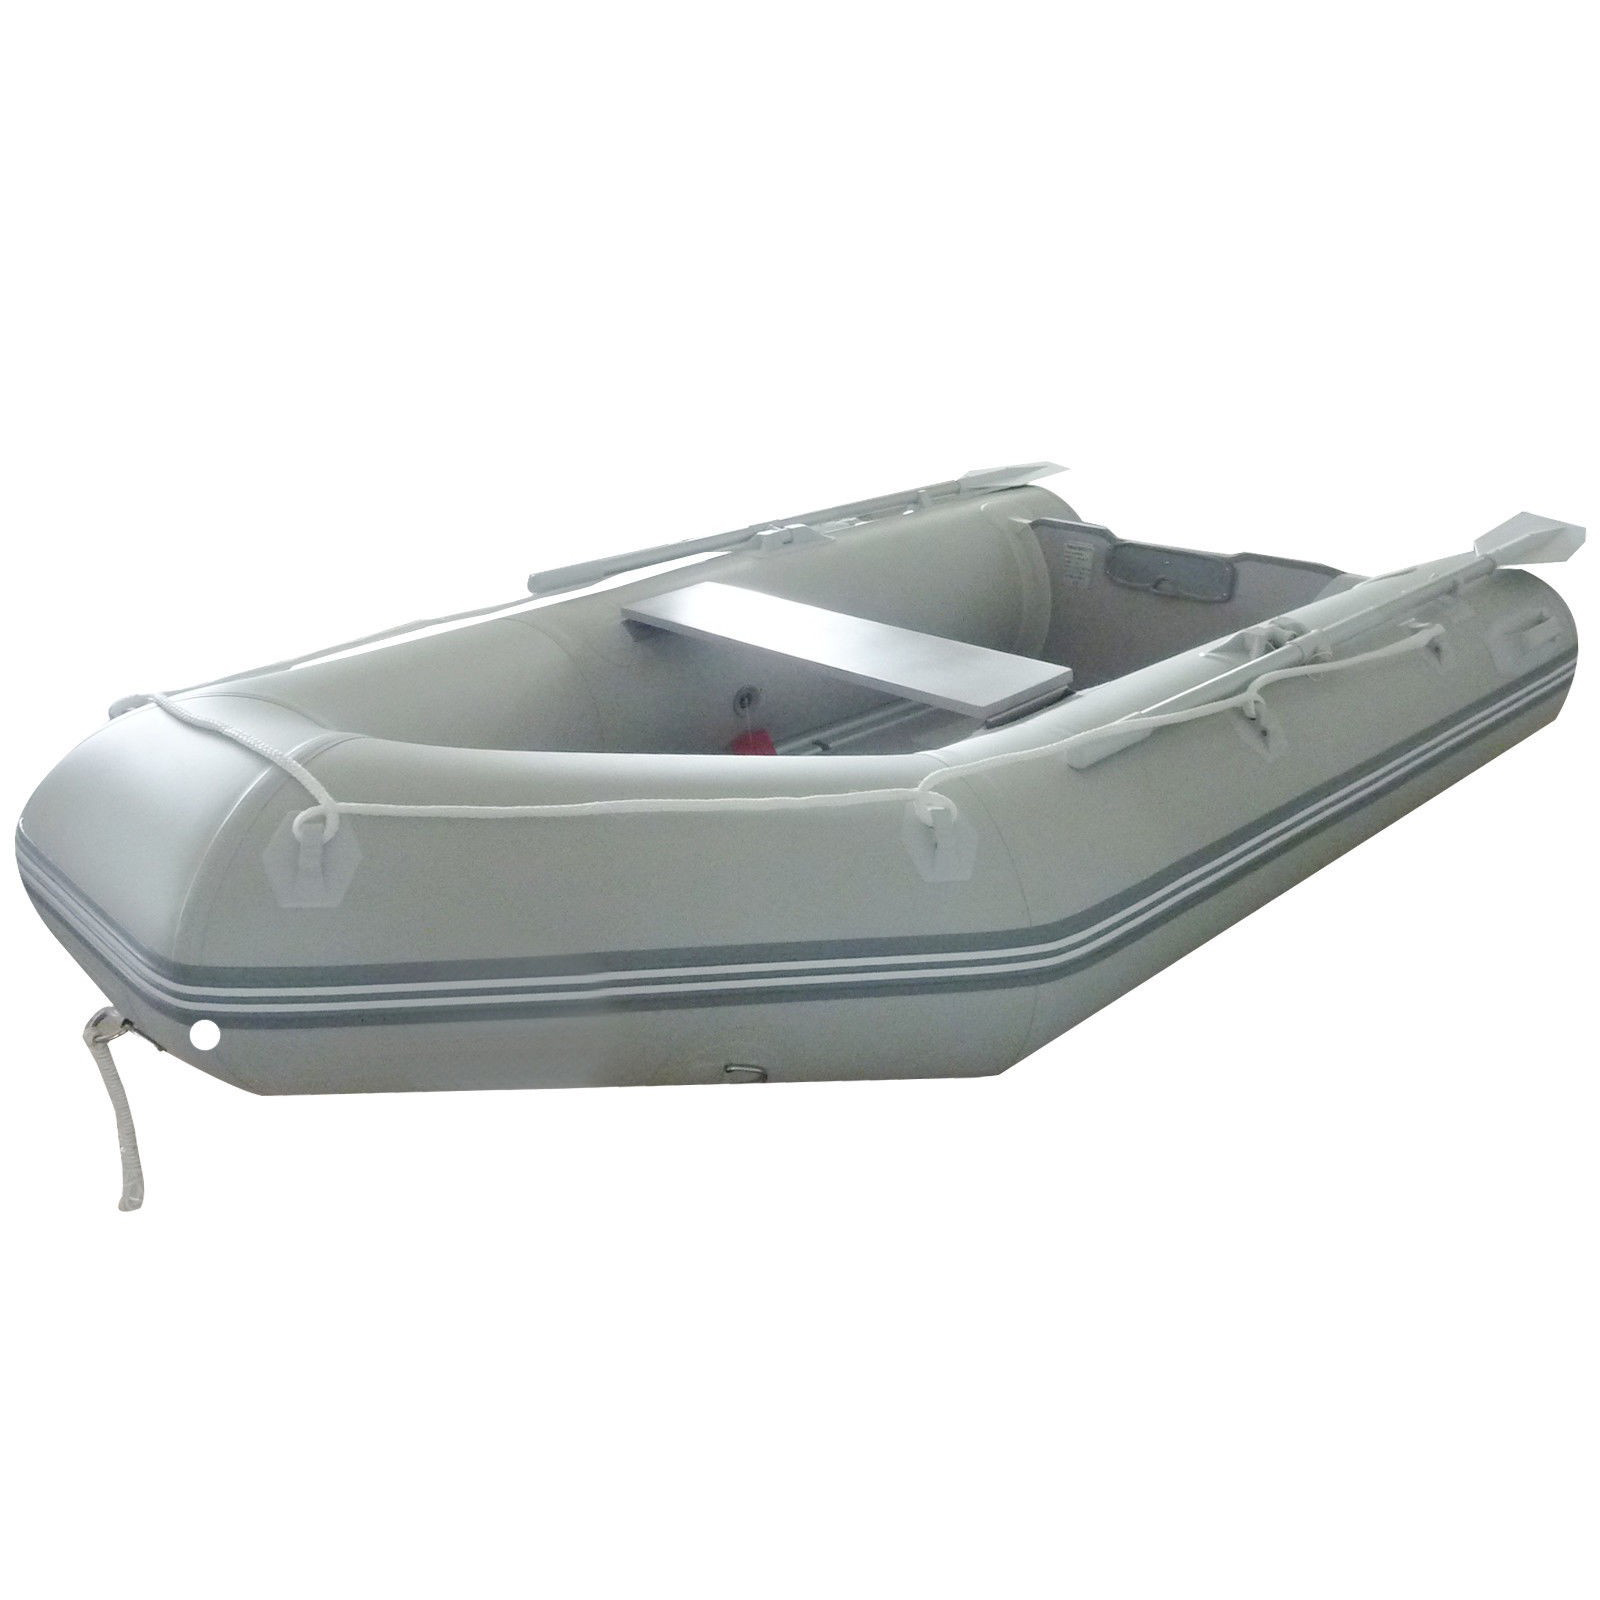 1.2 MM PVC Tender Raft Dinghy Inflatable Boat With Floor